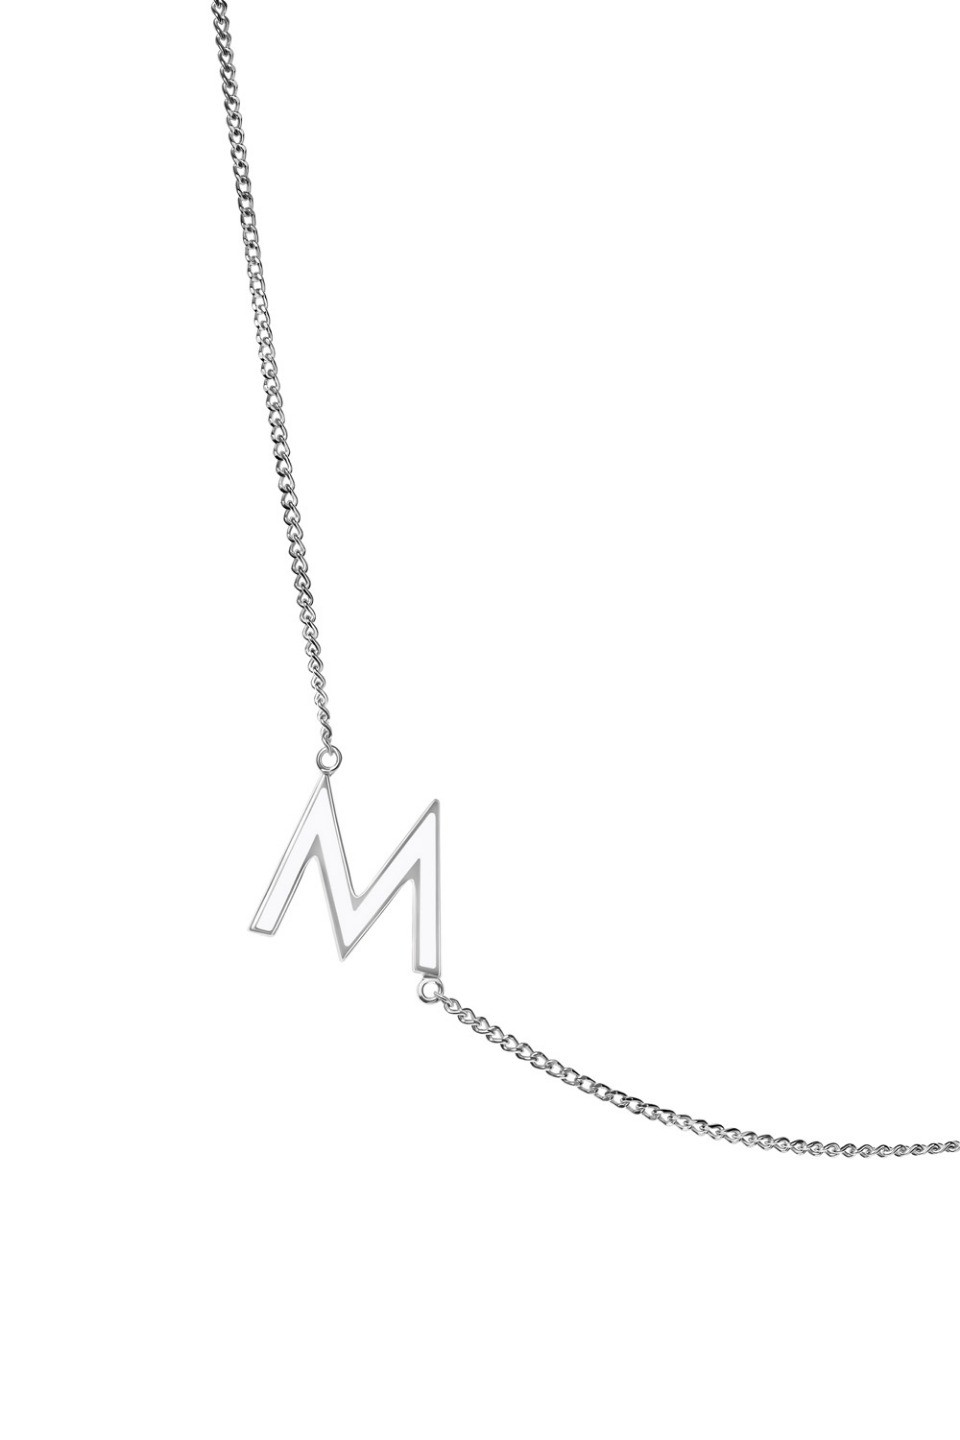 LETTER M NECKLACE WITH WHITE ENAMEL  